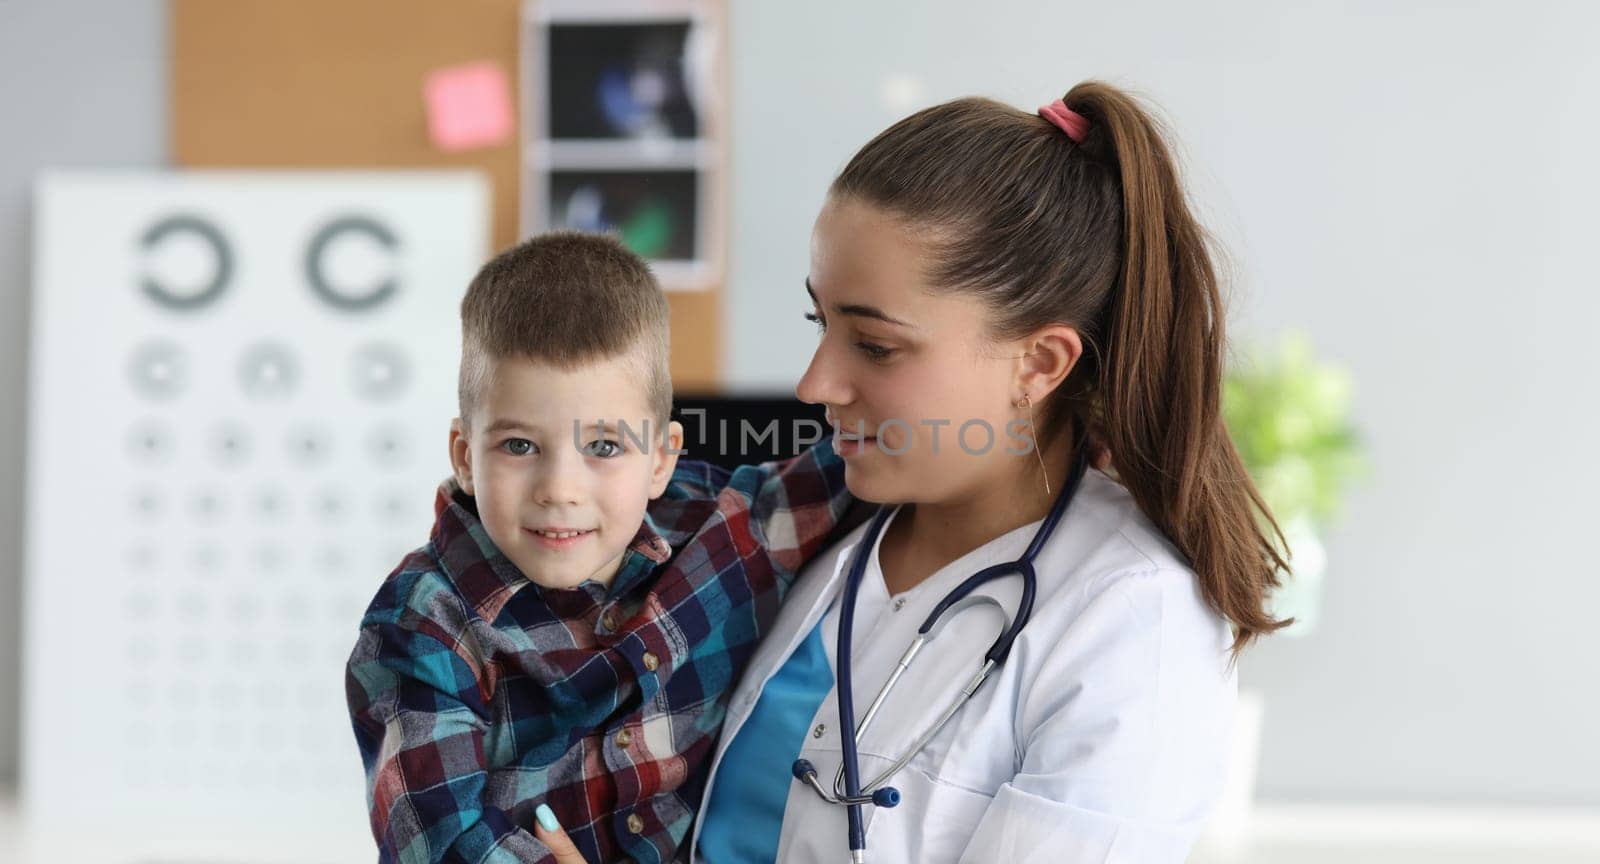 Close-up of female doctor carrying kid in arms. Professional pediatric with stethoscope on neck. Cheerful and friendly atmosphere. Planned checkup and modern medicine concept